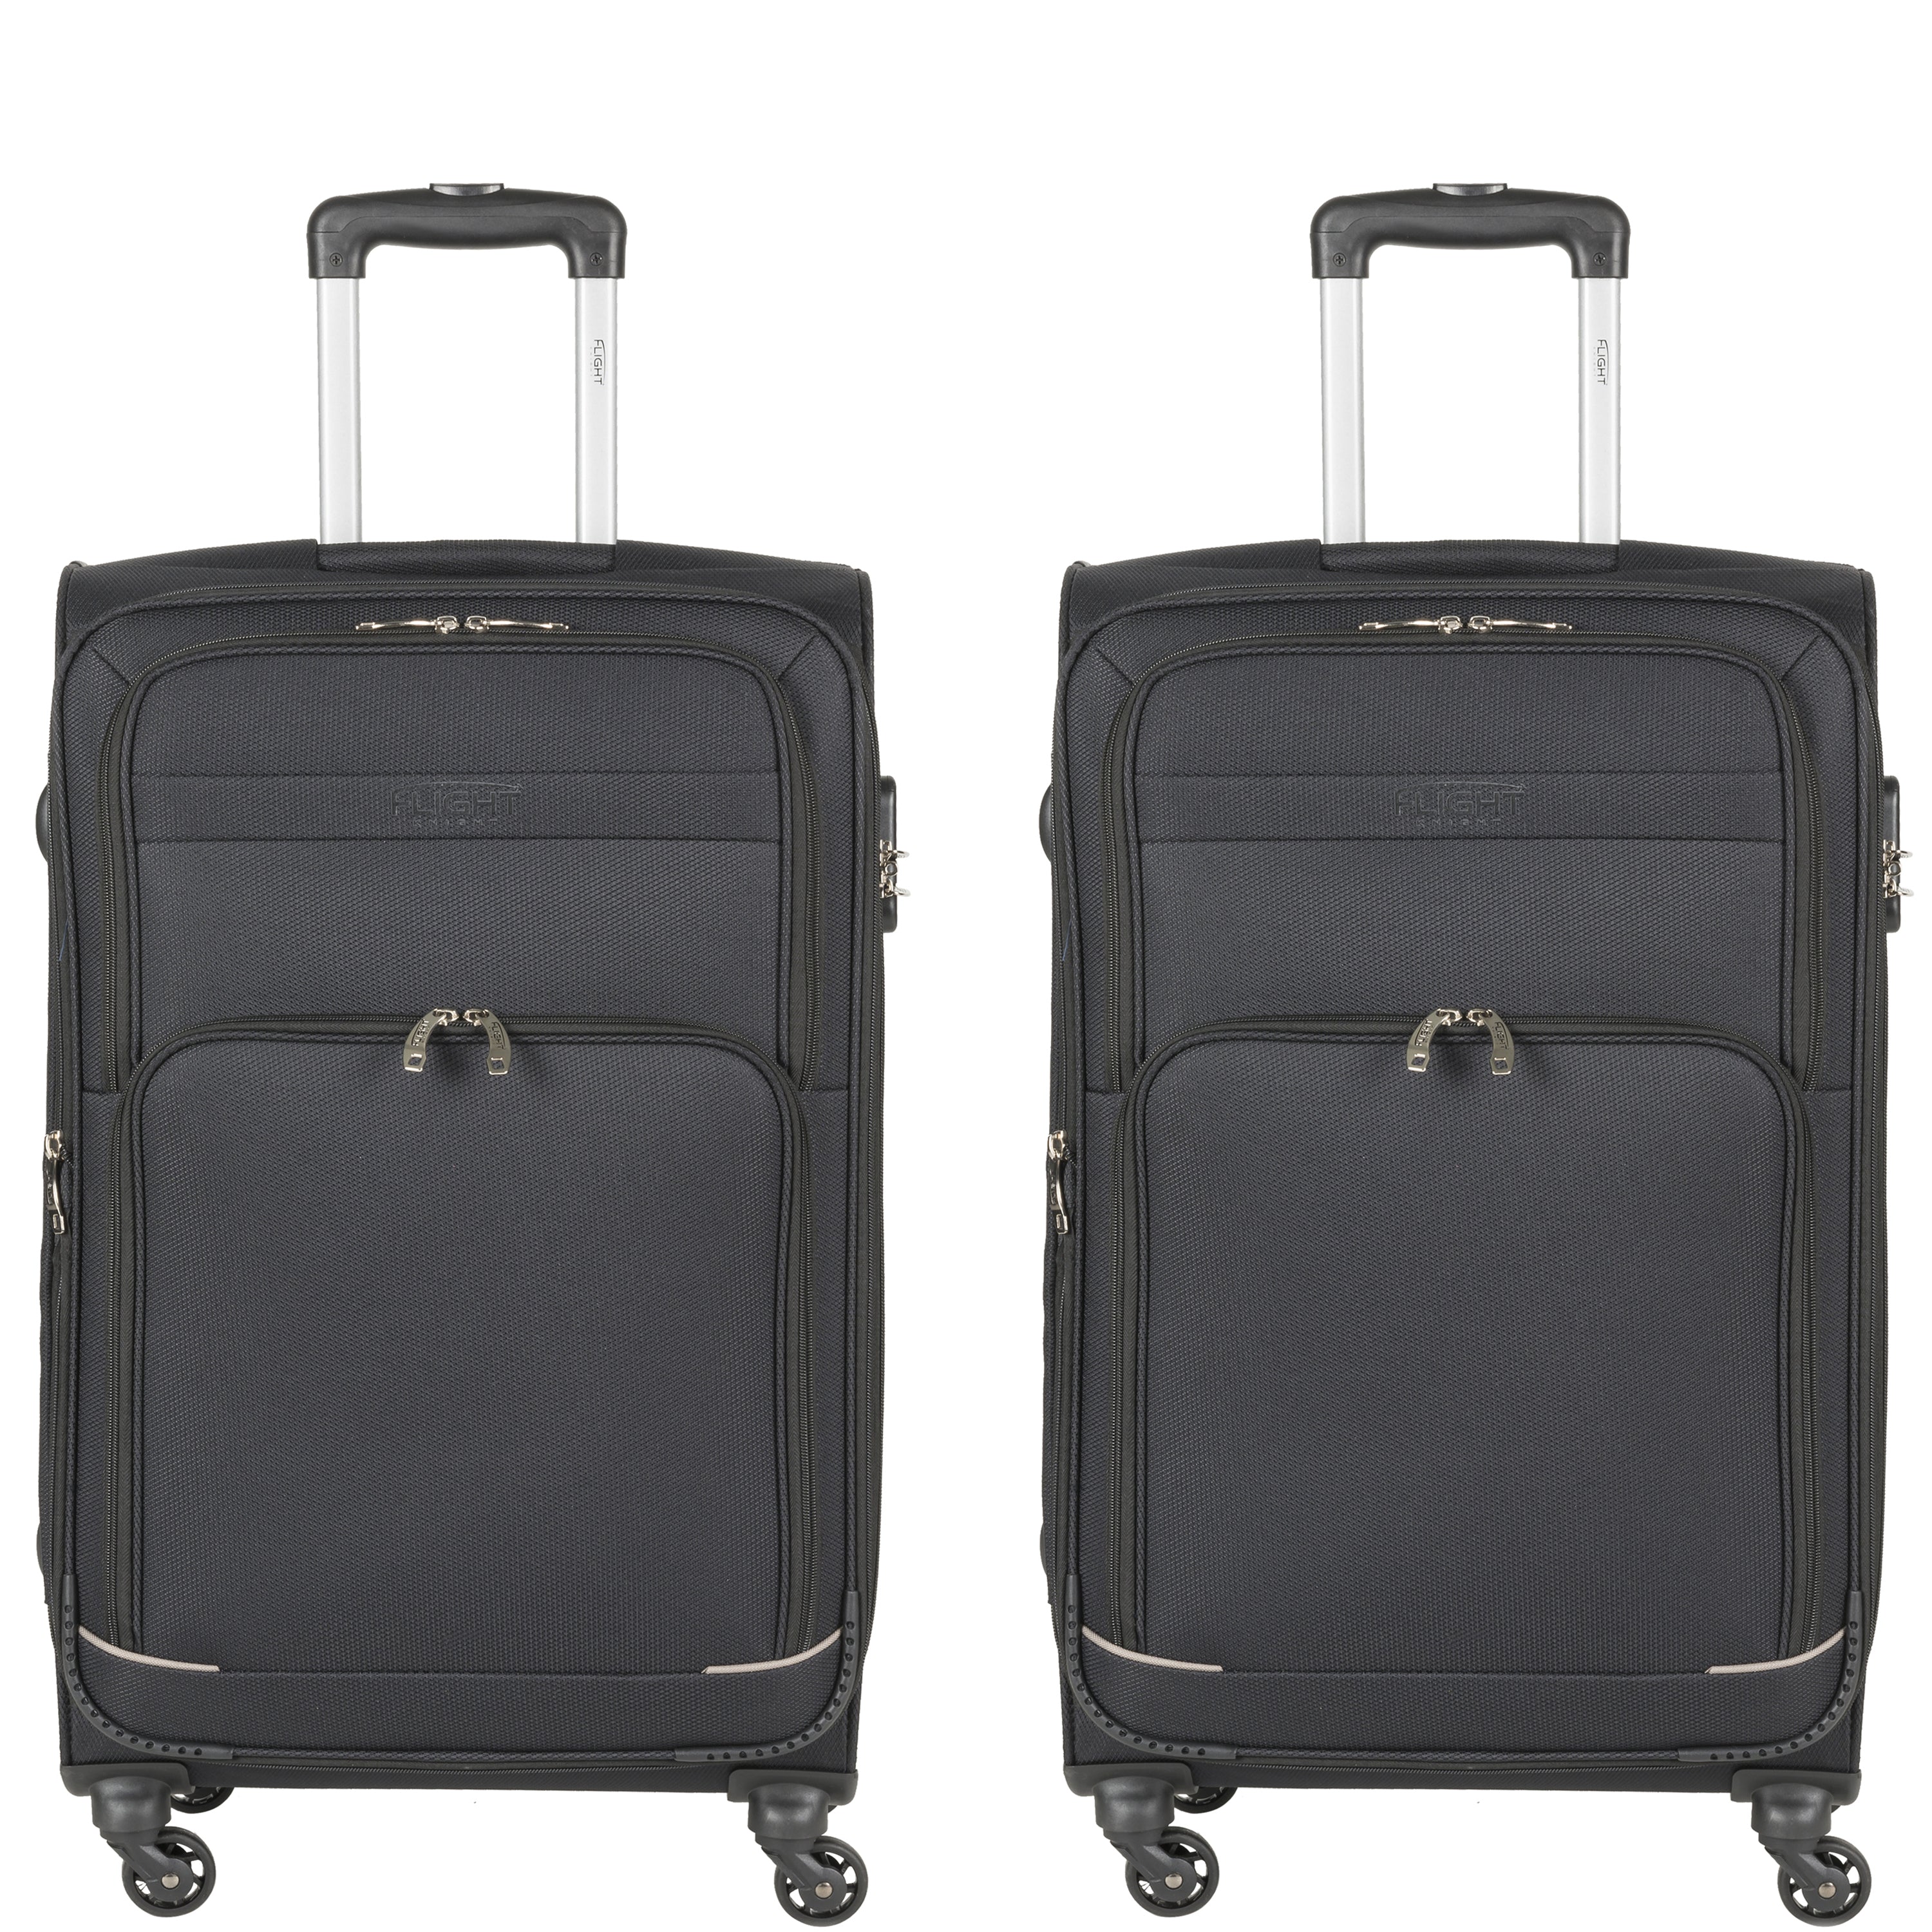 Lightweight 8 Wheel Spin Cabin Suitcases & Hold Luggage RyanAir BA Approved